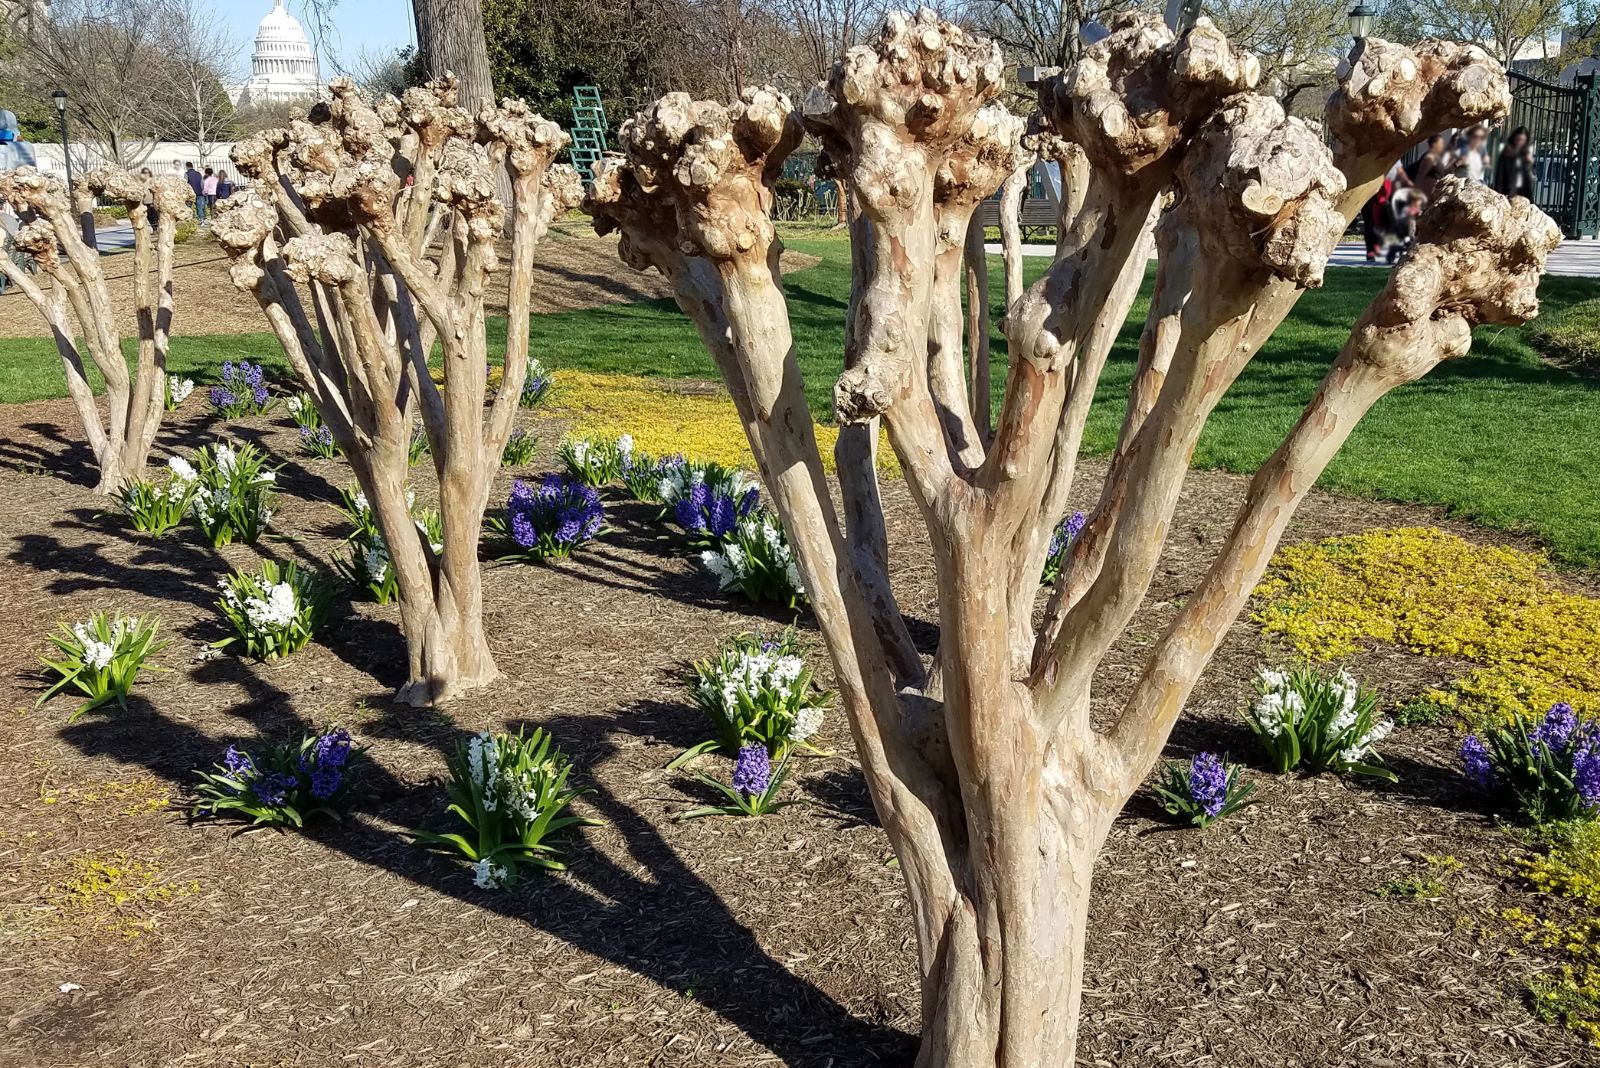 Pruned Crape Myrtle tree trunks in a flower bed ready to start blooming